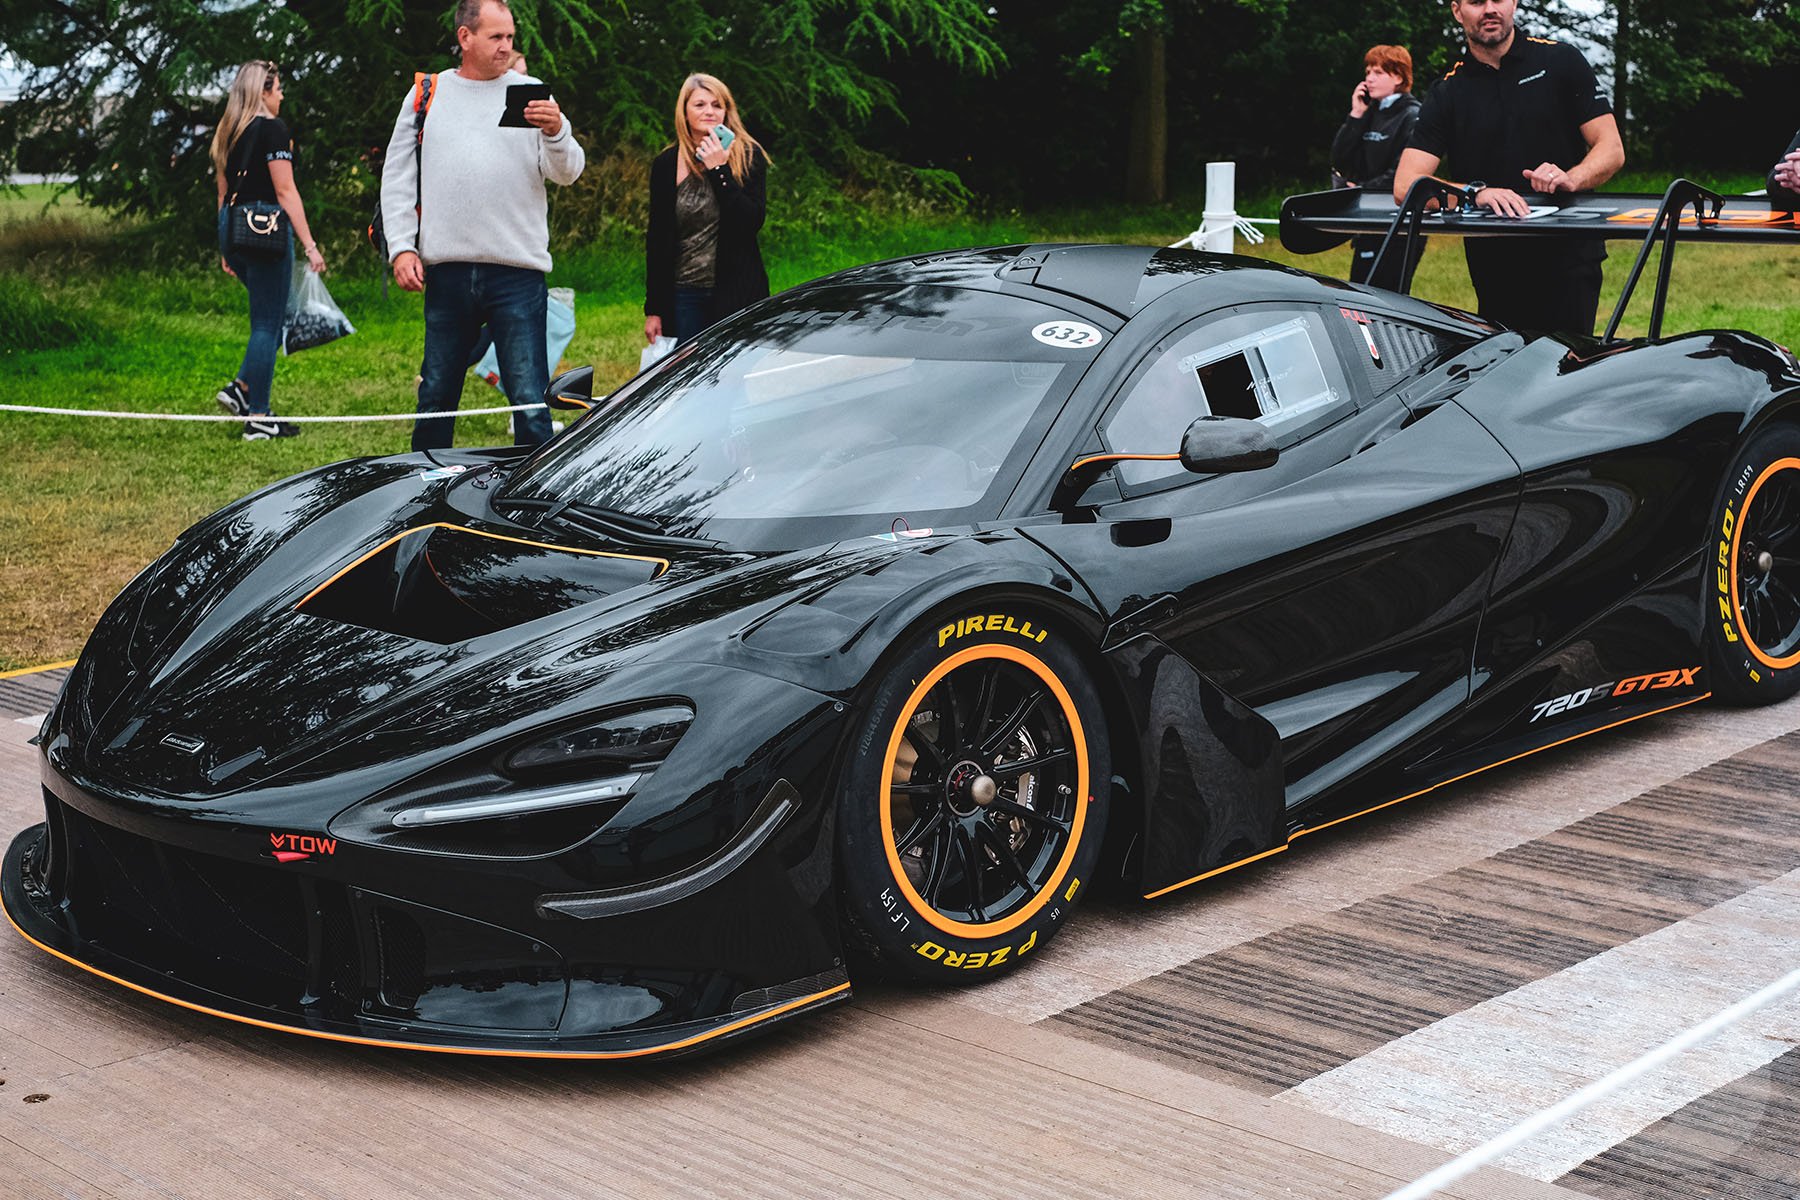 Photo Report: The 2021 Goodwood Festival Of Speed